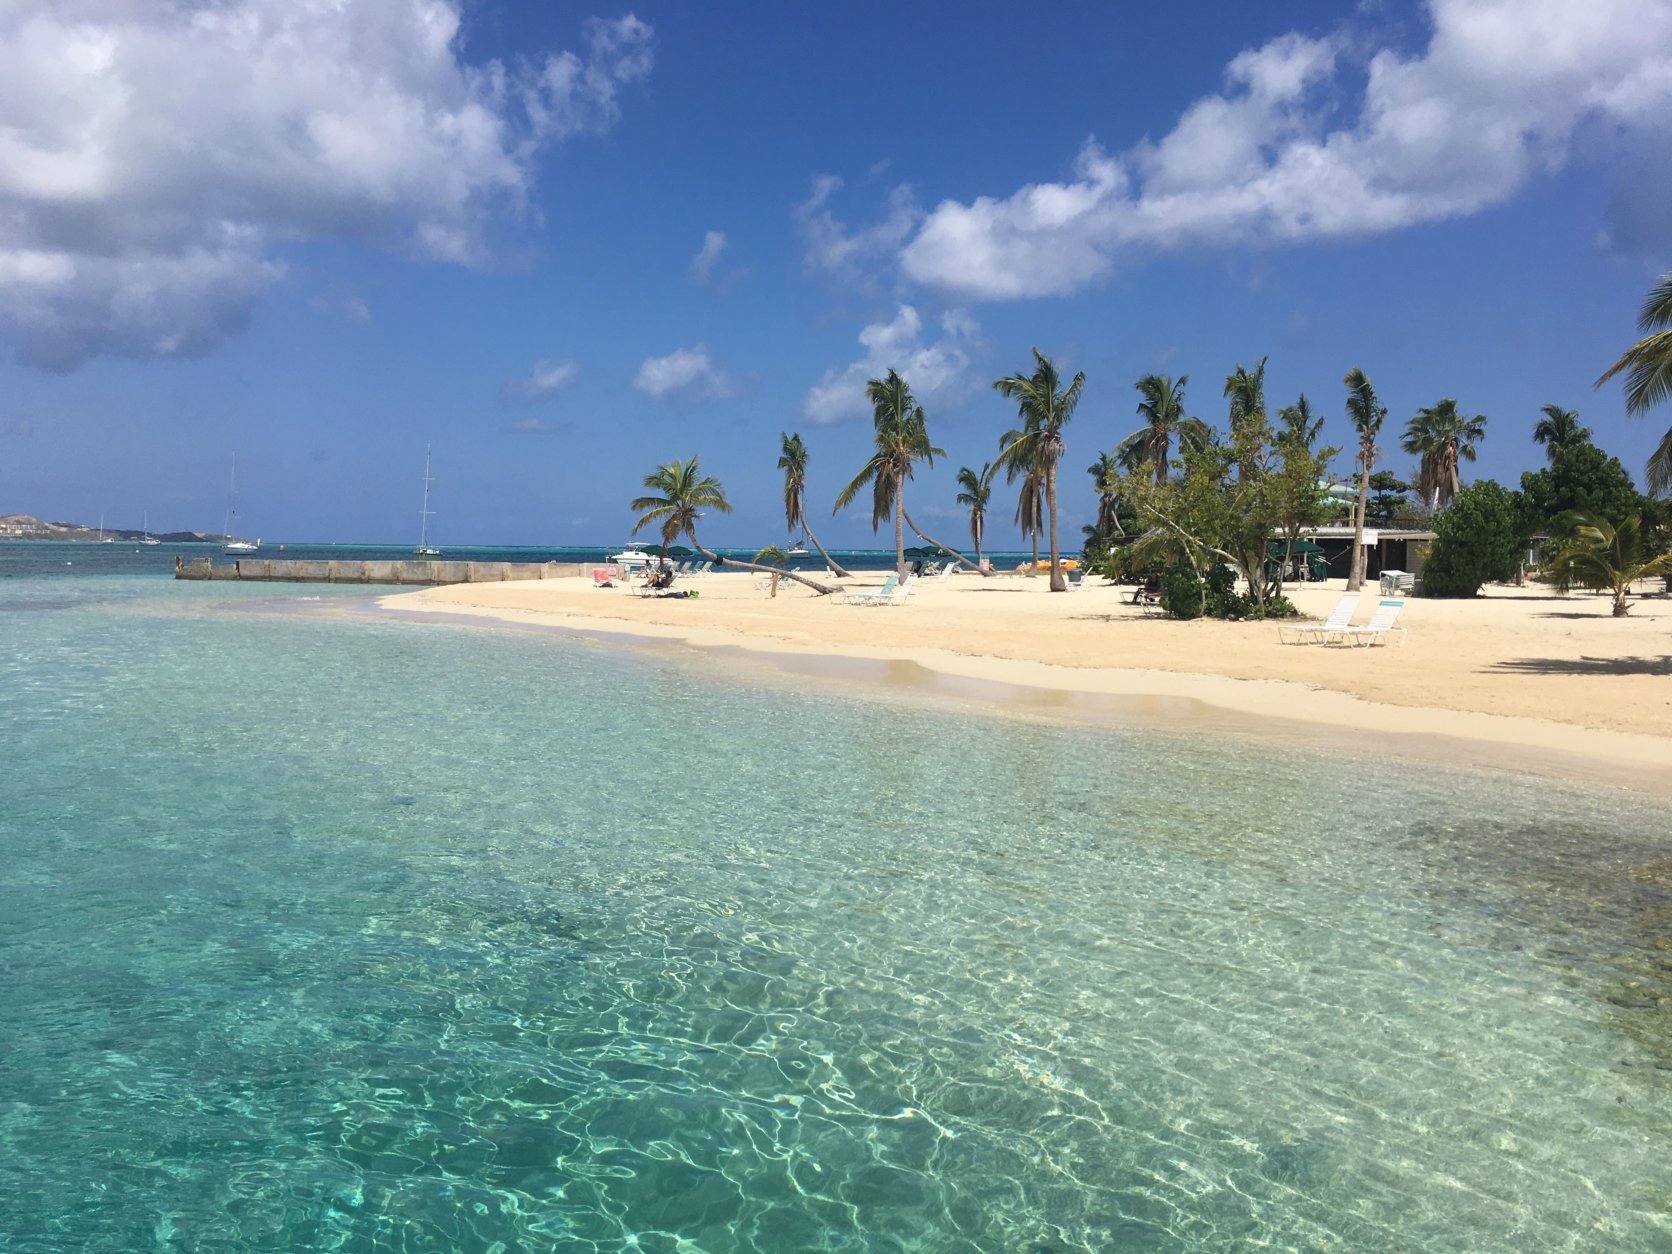 "The water is always green and the tourists are coming back," said Fran Scuderi, of Olney, Maryland, from St. Croix where he owns two homes. "It's truly amazing the resilience down here." (Courtesy Fran Scuderi)